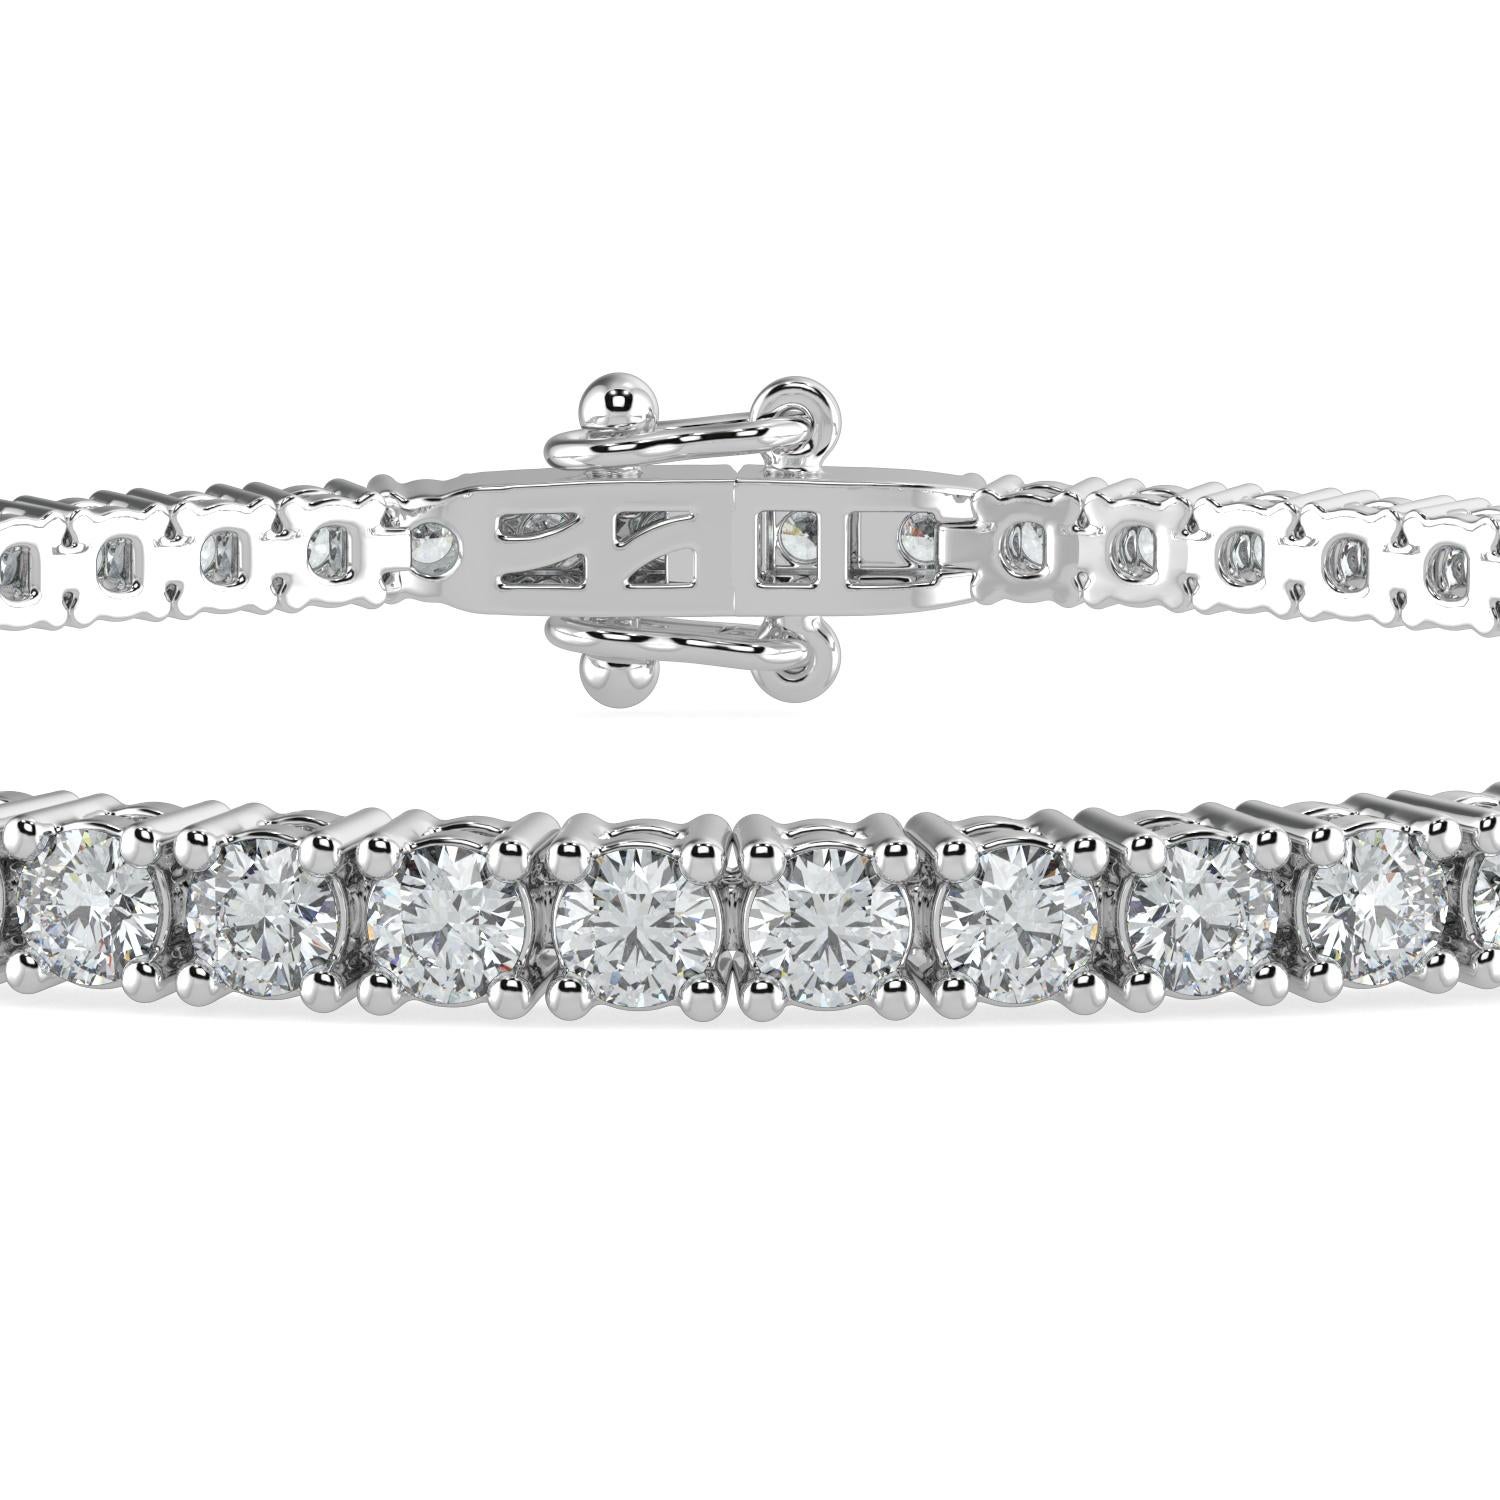 10.00 Carat Round Cut GH-I1 Natural Diamond Classic Tennis Bracelet 4 Prong 14K White Gold for Women

Specification
Brand: AAMIAA
Length: 7 Inches 
Color: GH
Carat Weight: 10.00CTW
Clarity: I1

LUXURIOUS AND LASTING- Our bracelets are a luxurious